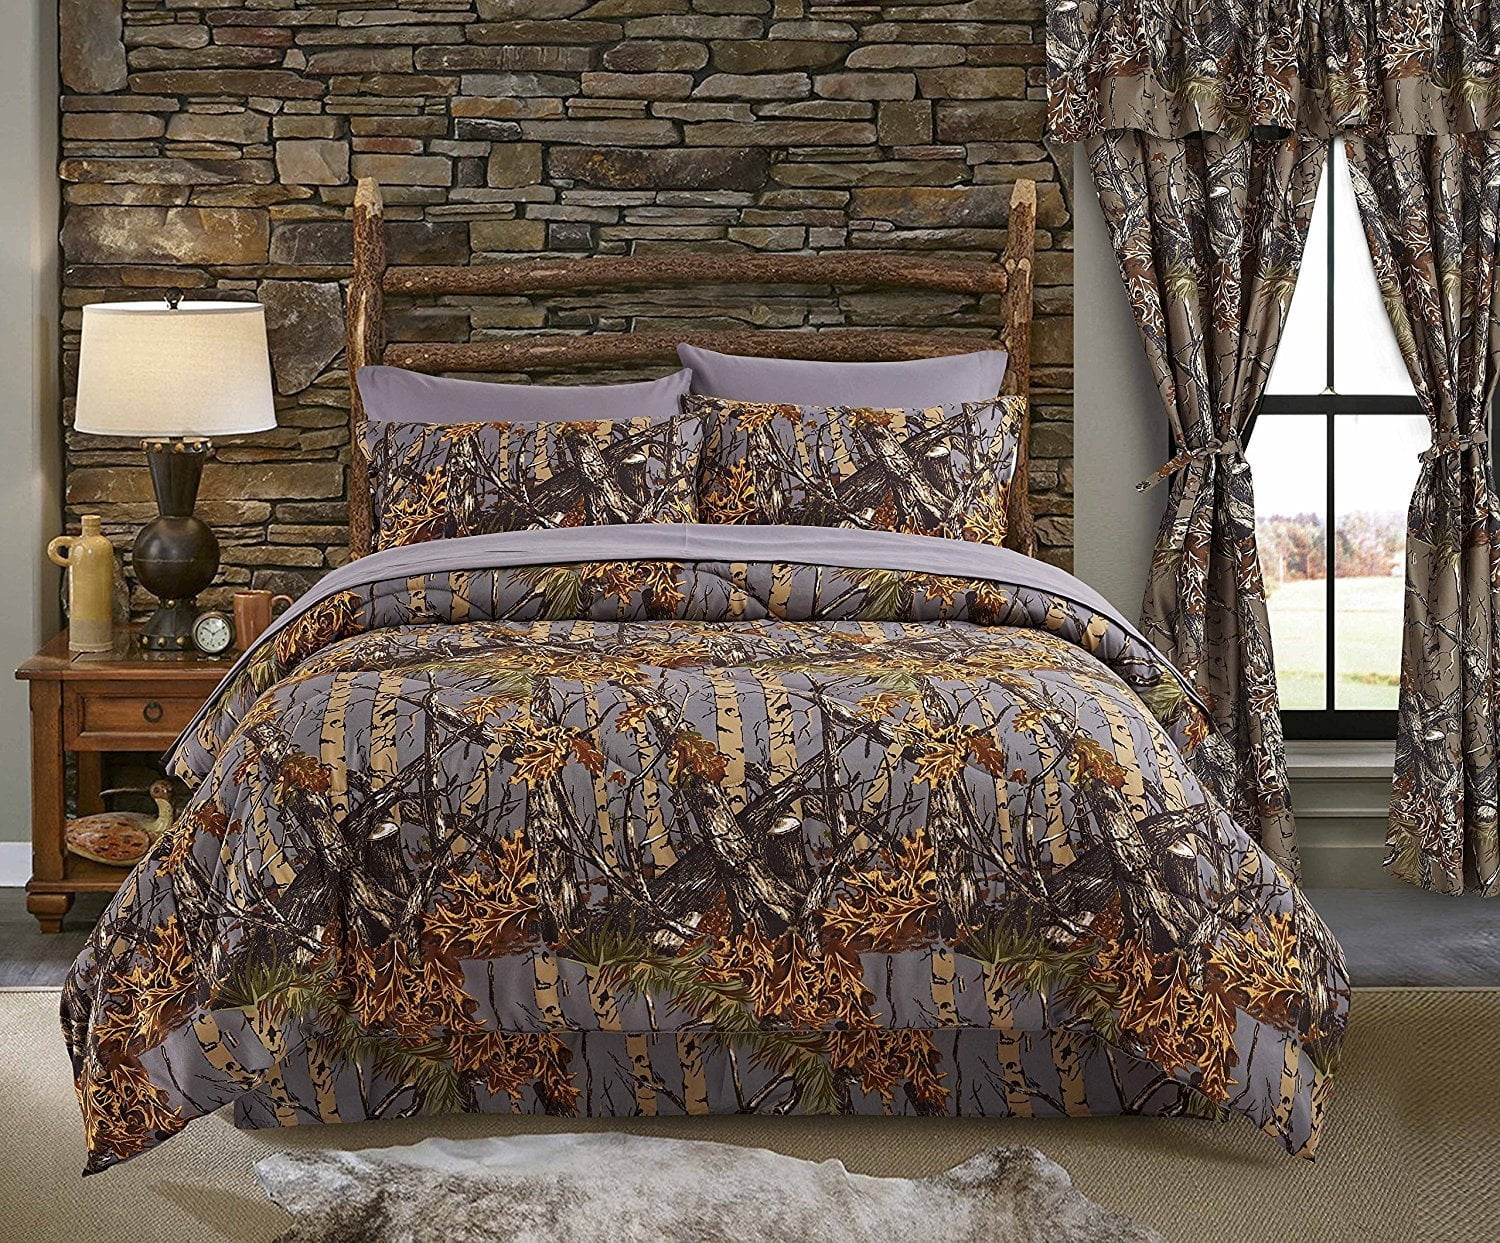 17 PC BROWN CAMO CAL KING SIZE SET! COMFORTER SHEET TWO CURTAIN SETS CAMOUFLAGE 